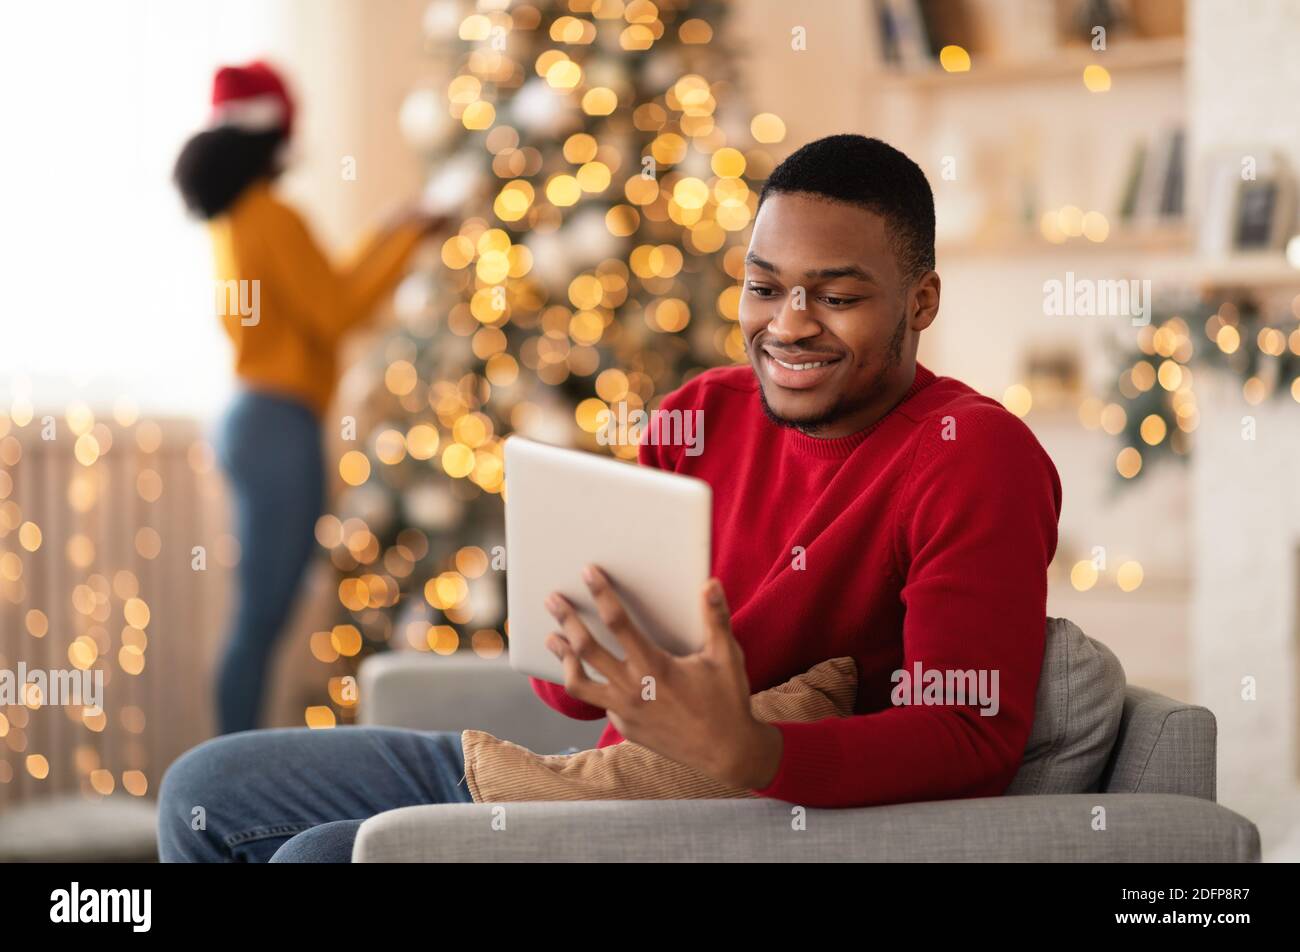 Selection of gifts for family and online shopping at home Stock Photo